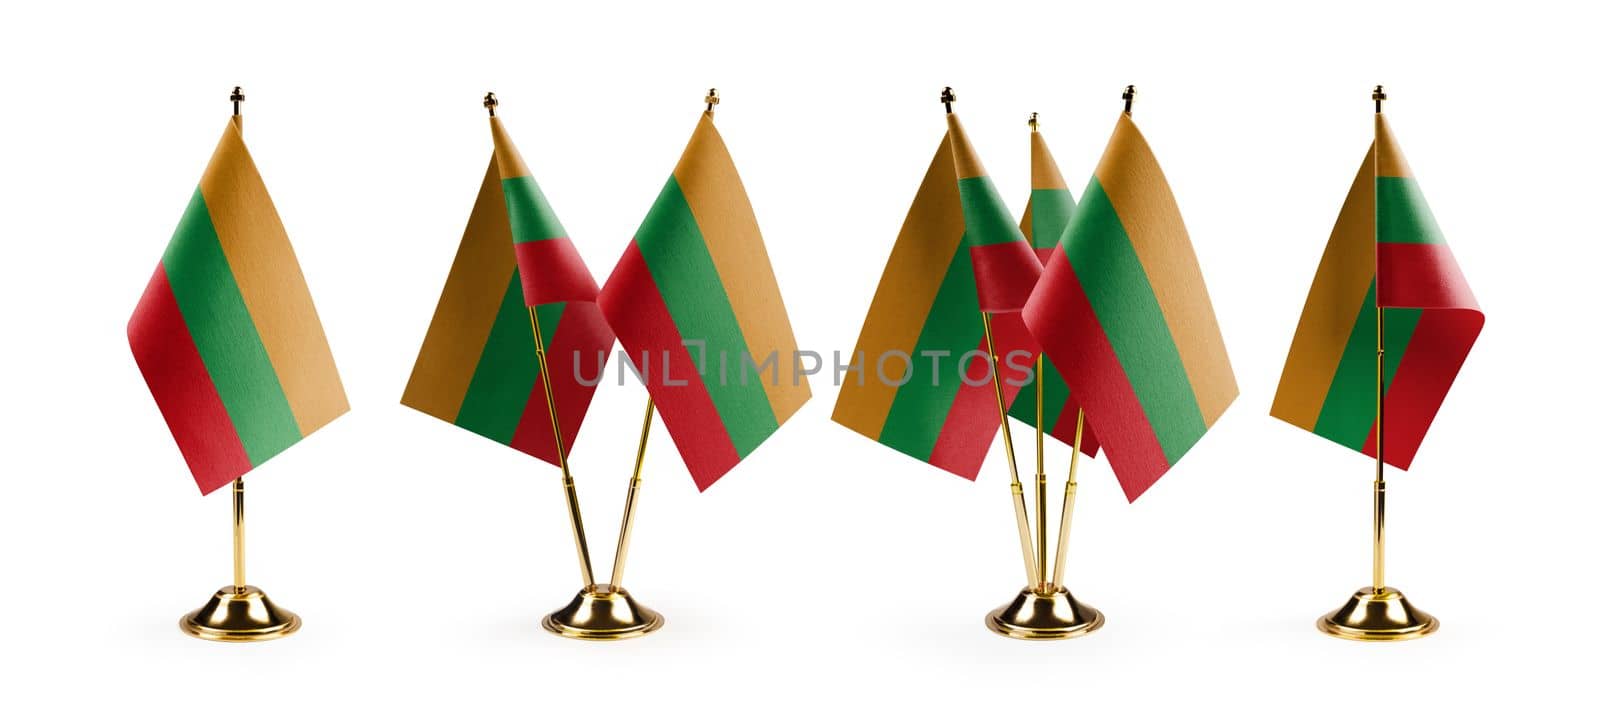 Small national flags of the Lithuania on a white background by butenkow